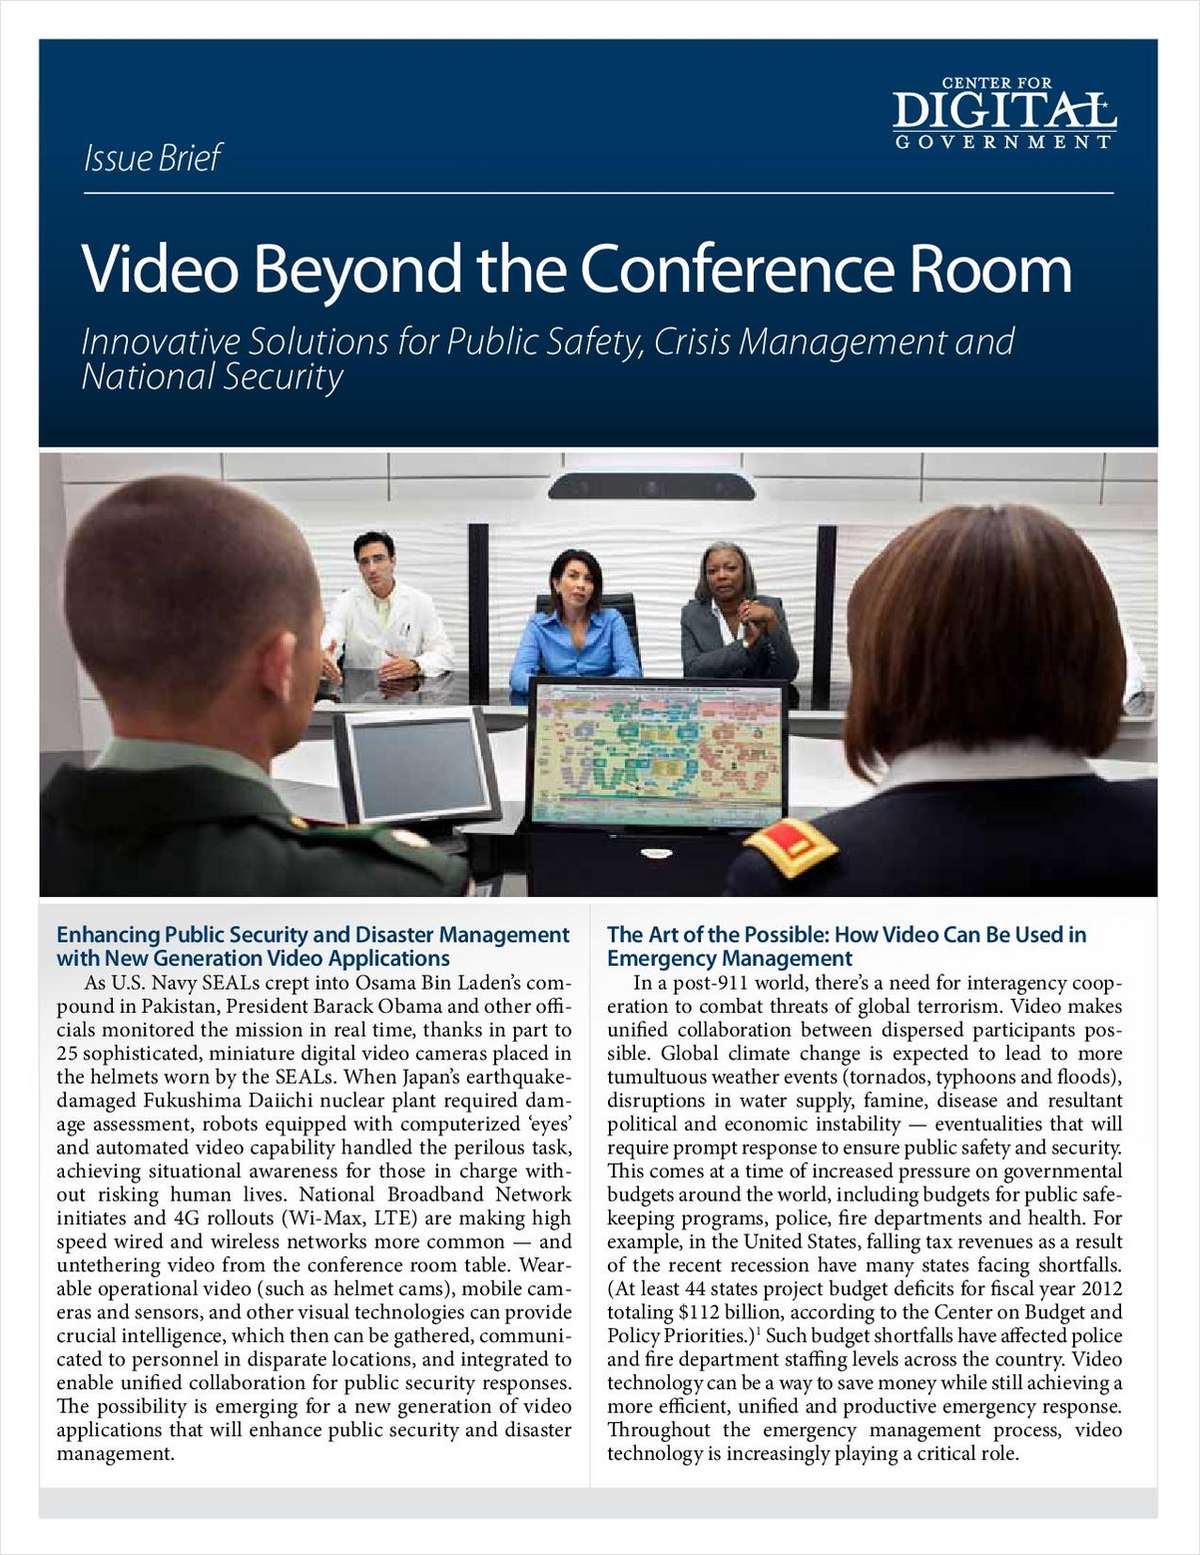 Video Beyond the Conference Room